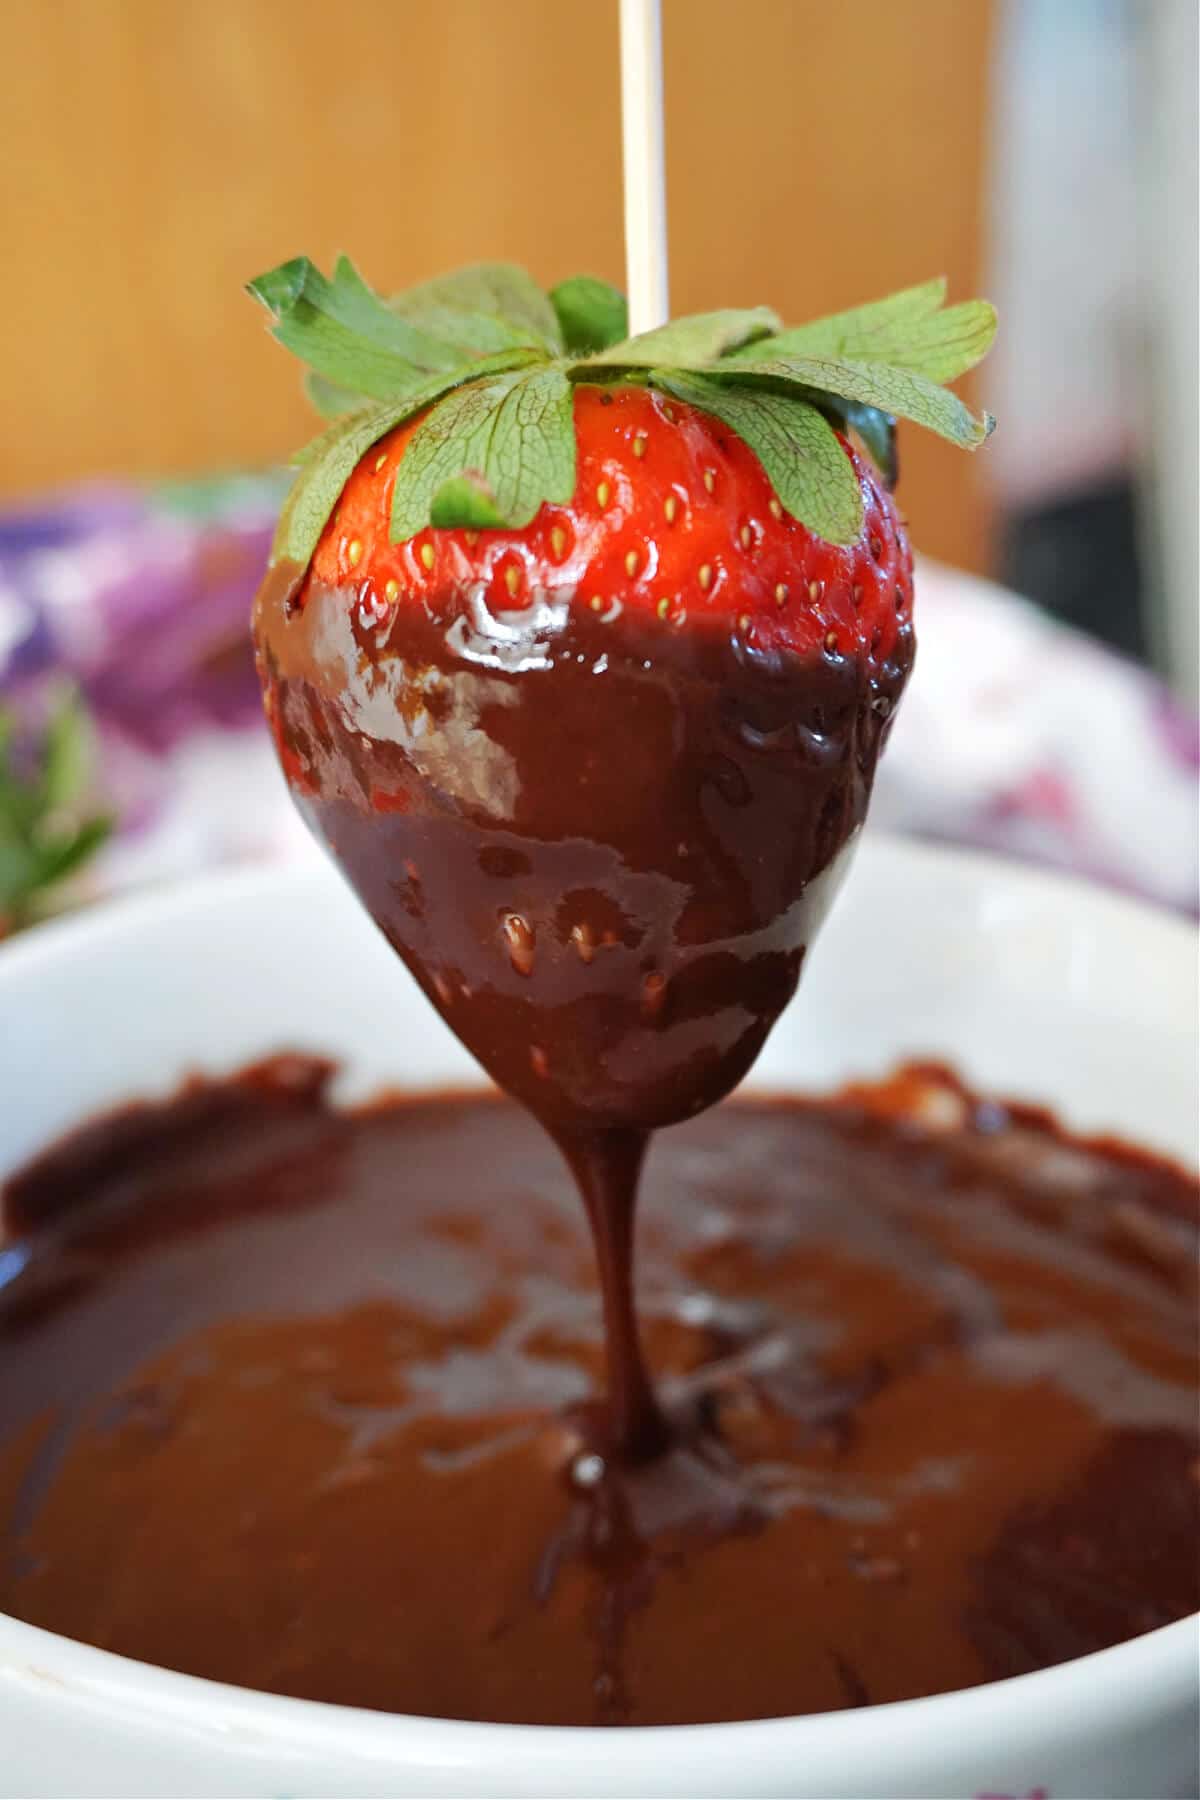 A strawberry being dipped in chocolate sauce.